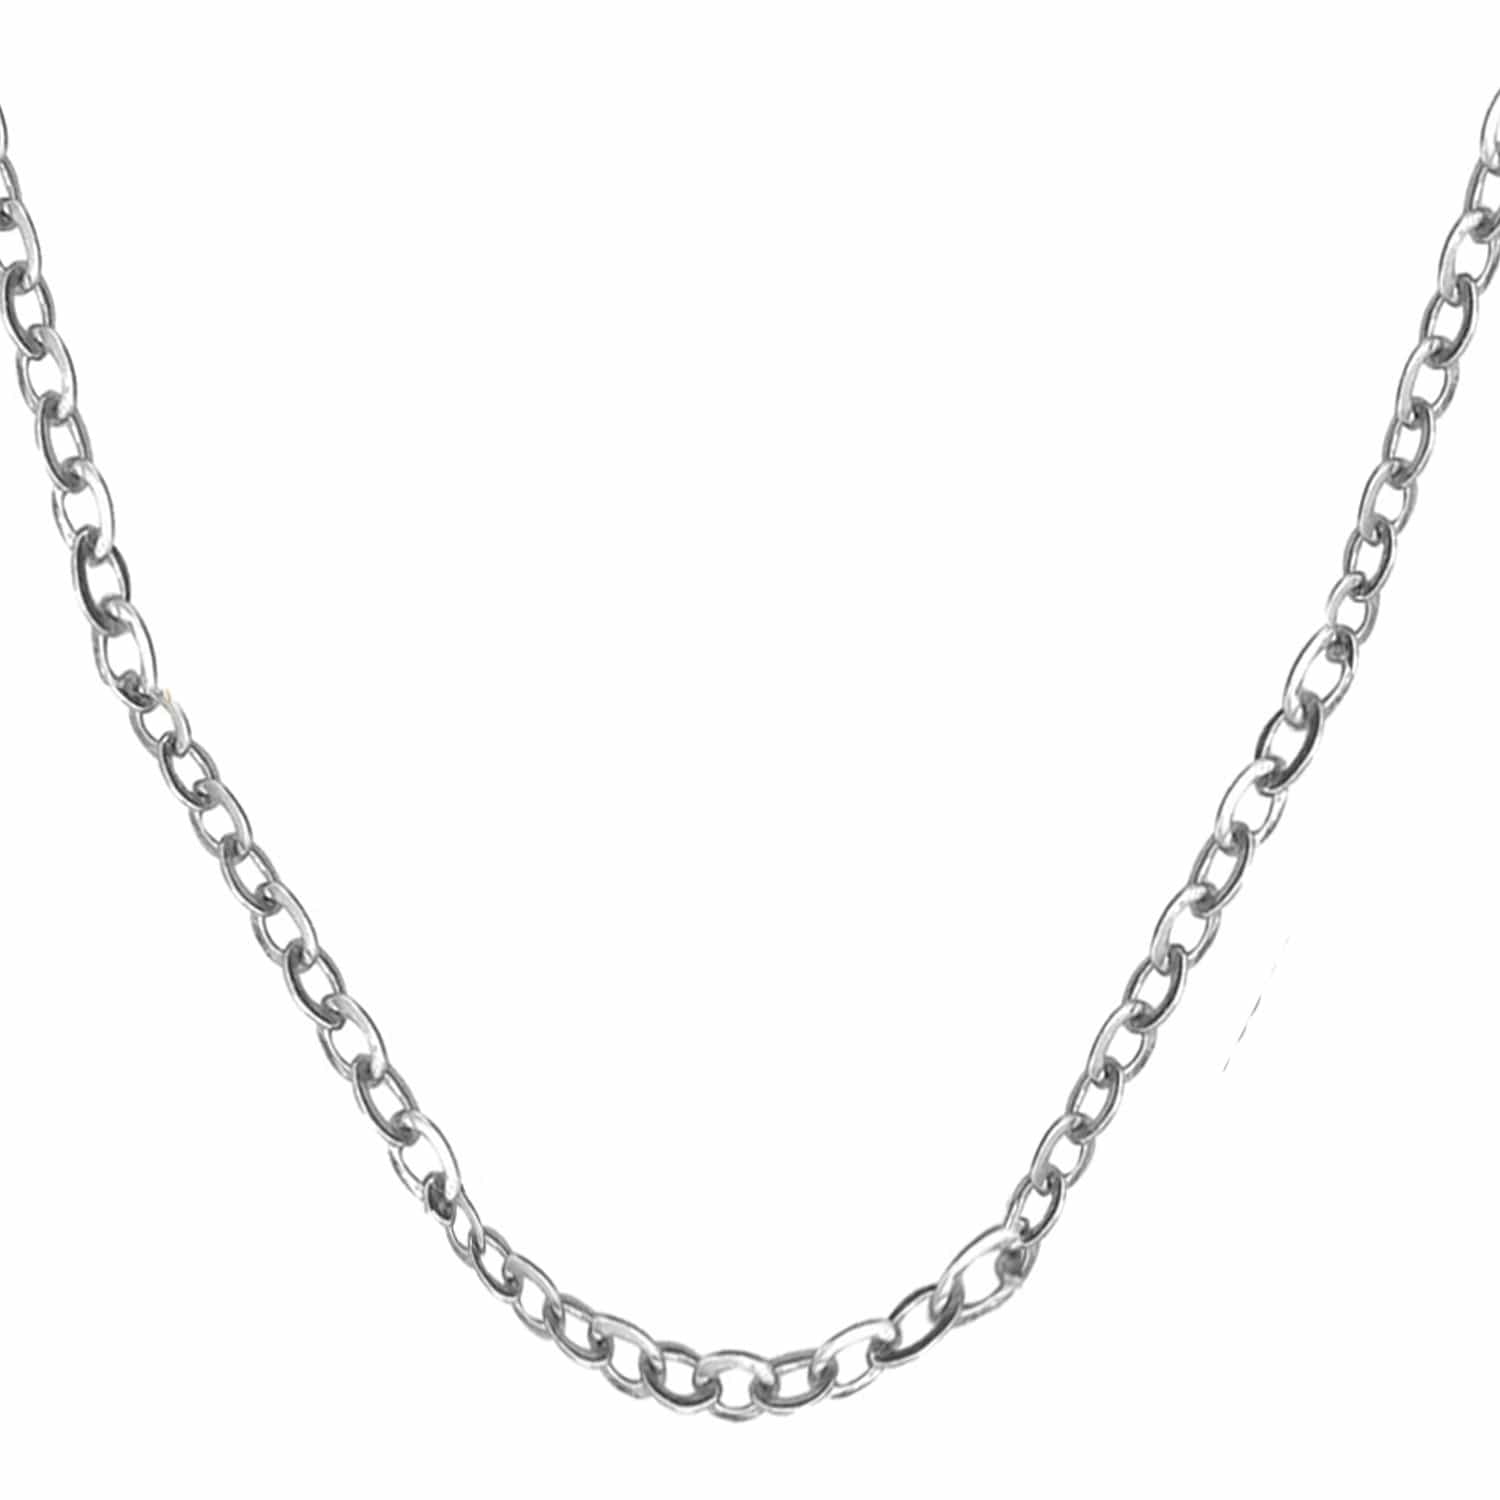 INOX JEWELRY Chains Silver Tone Stainless Steel Polished 2mm Round Cable Chain NSTC051-16